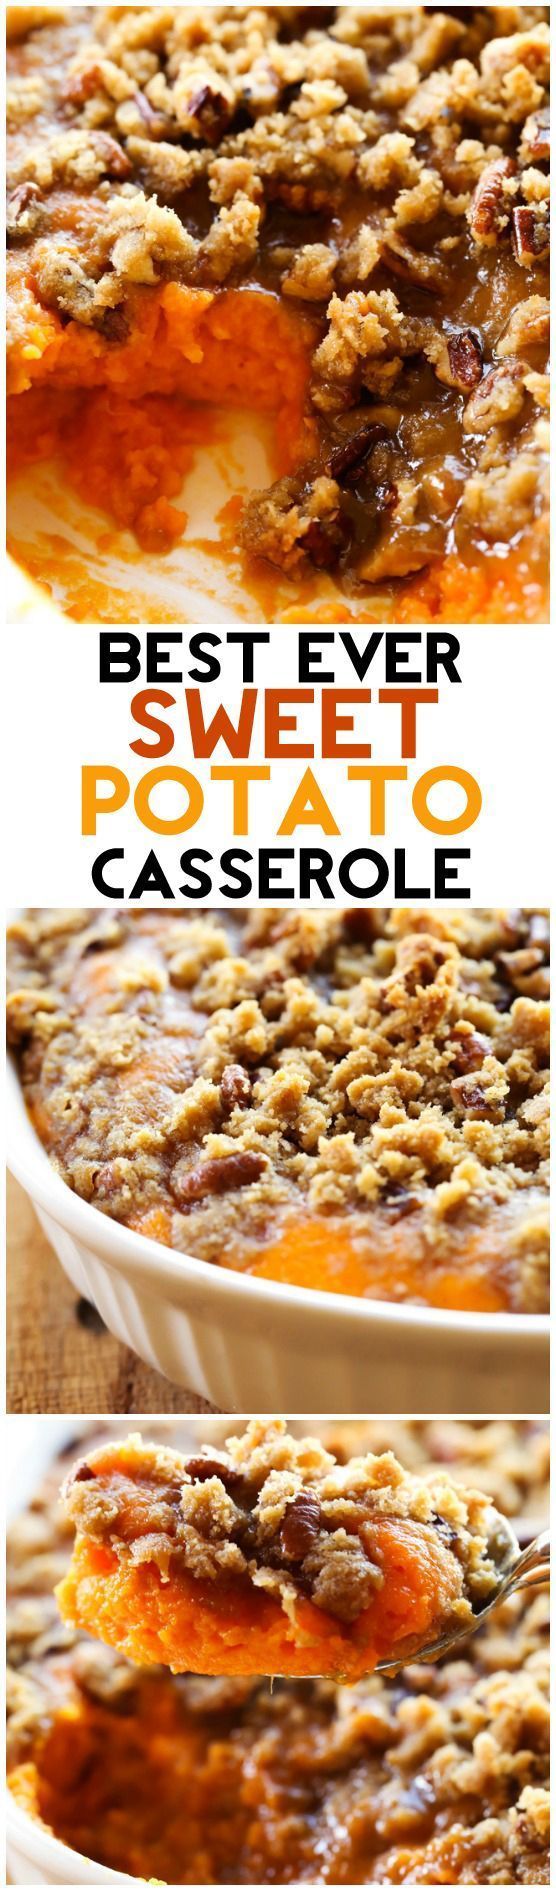 This Sweet Potato Casserole is my absolute FAVORITE side dish at Thanksgiving or anytime really! It is perfectly sweet with a